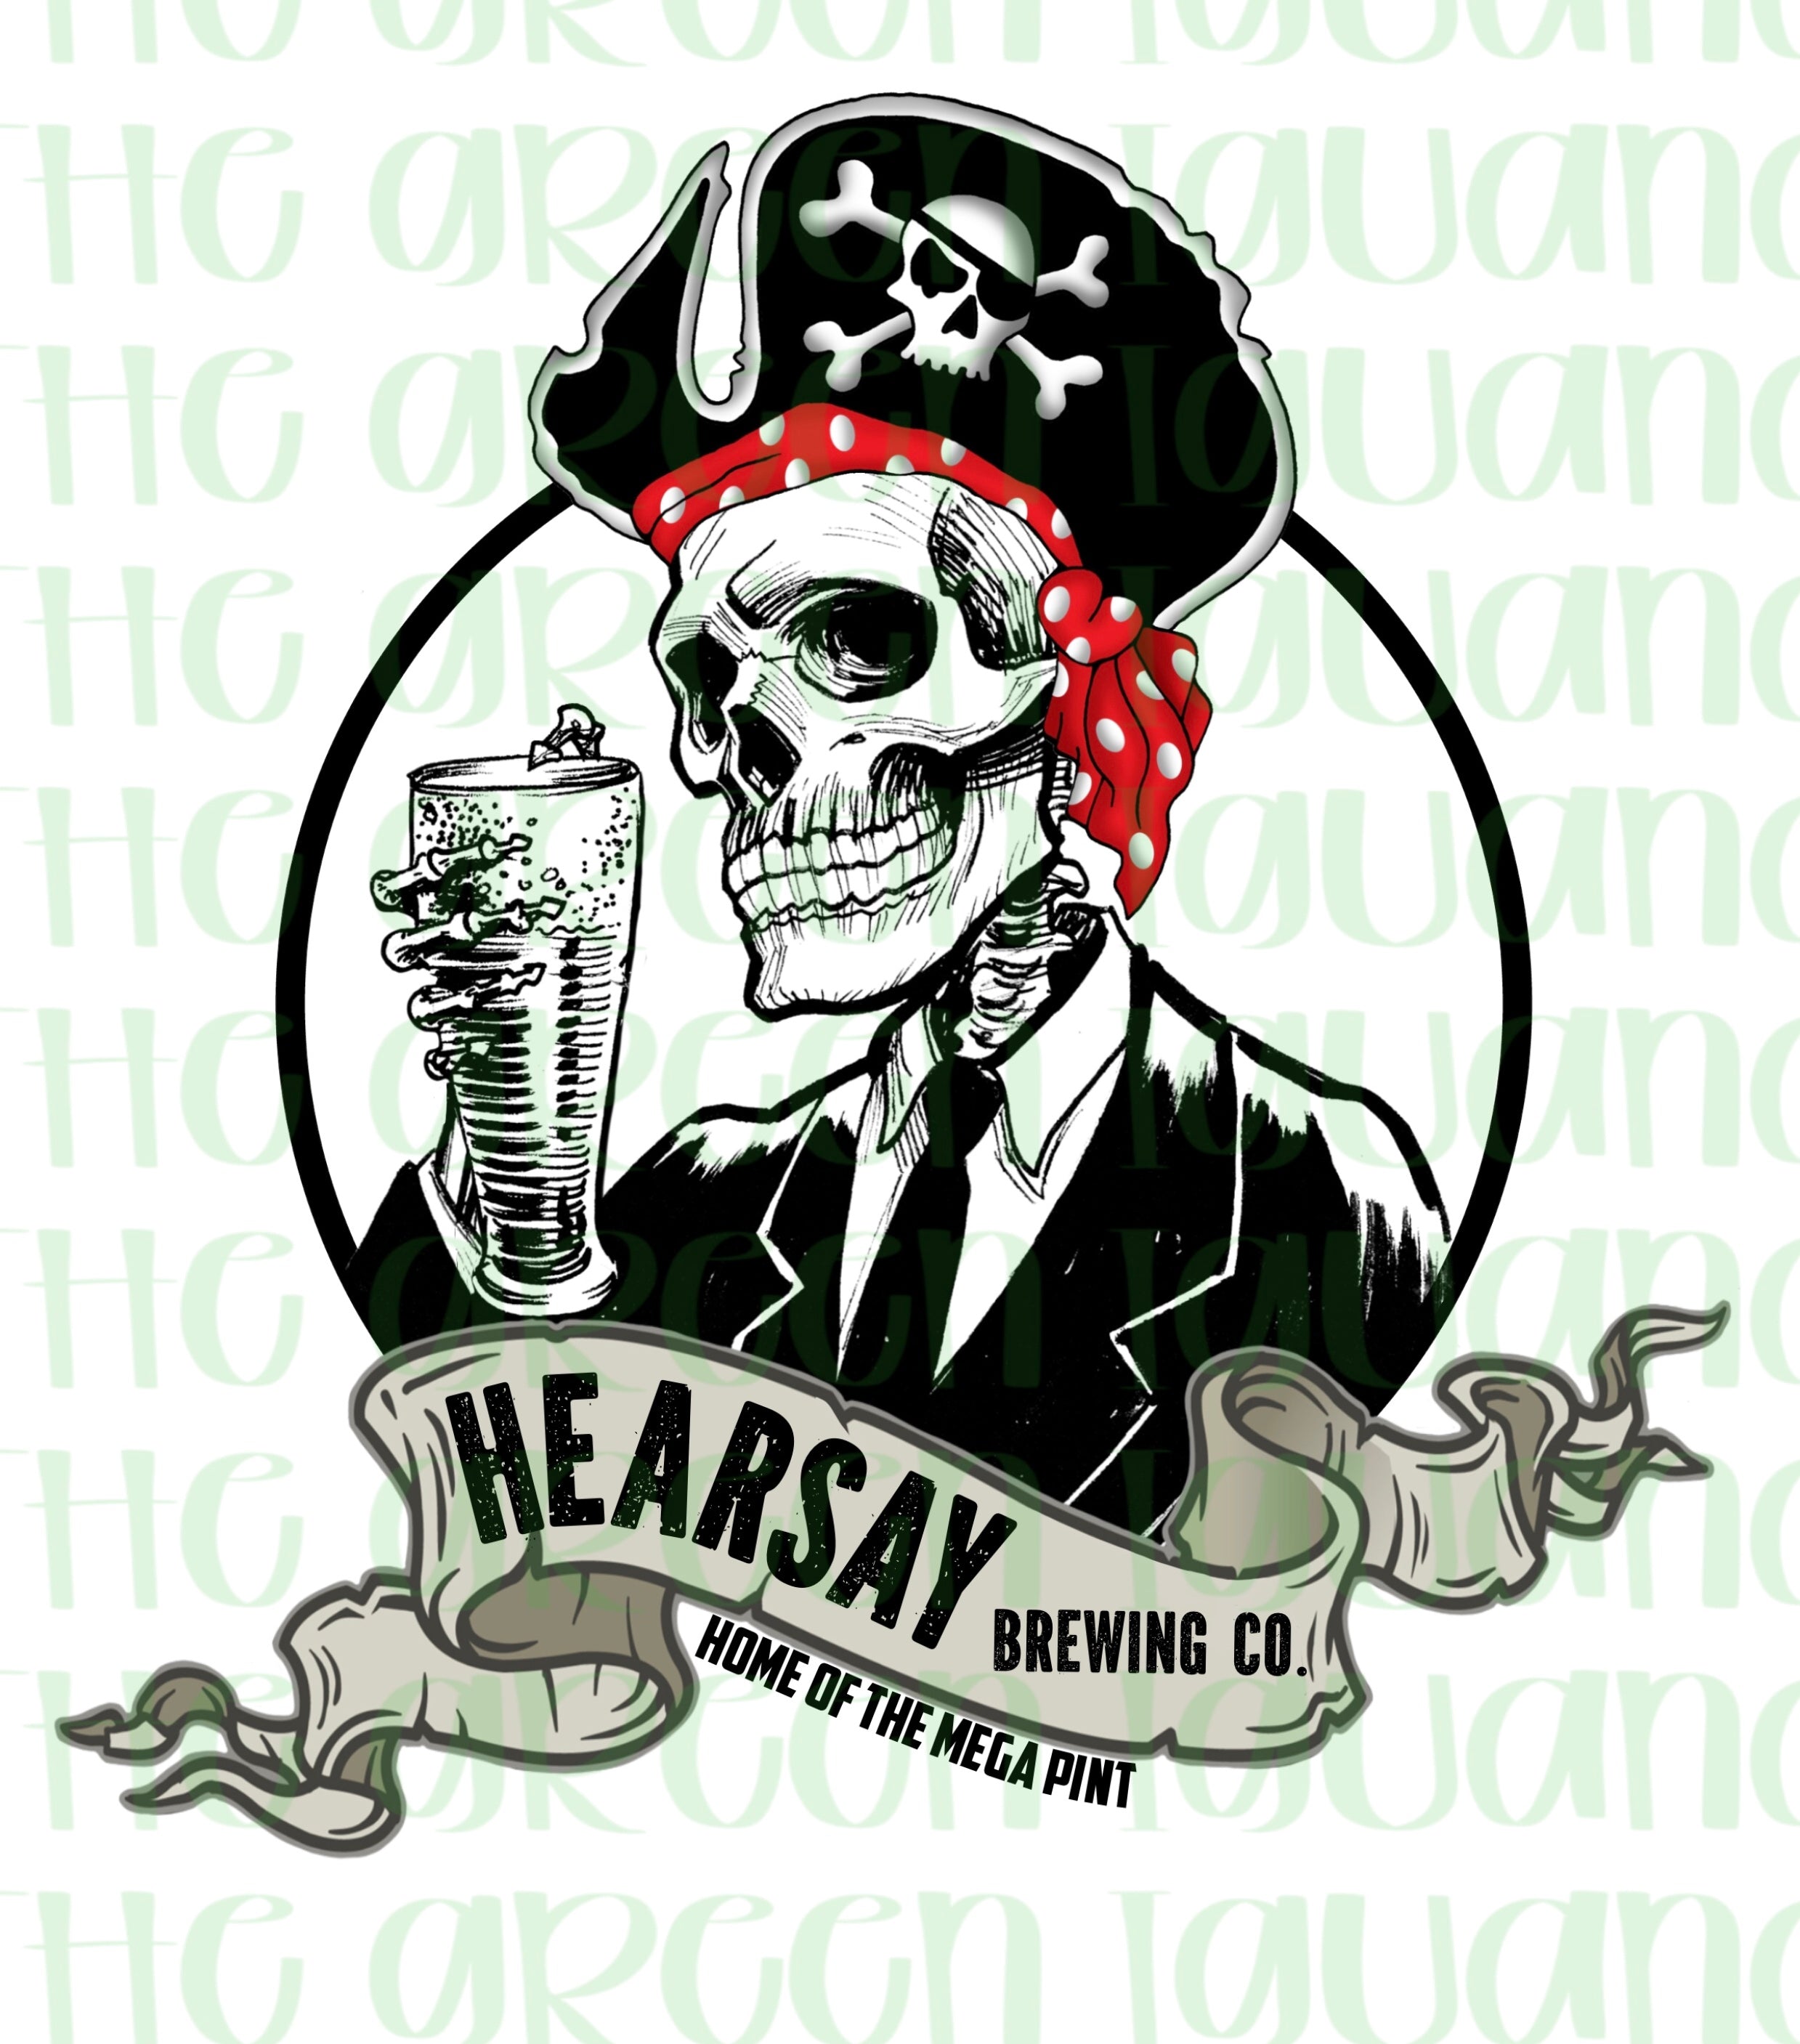 Hearsay Brewing Co. Home of the Mega Pint - DIGITAL